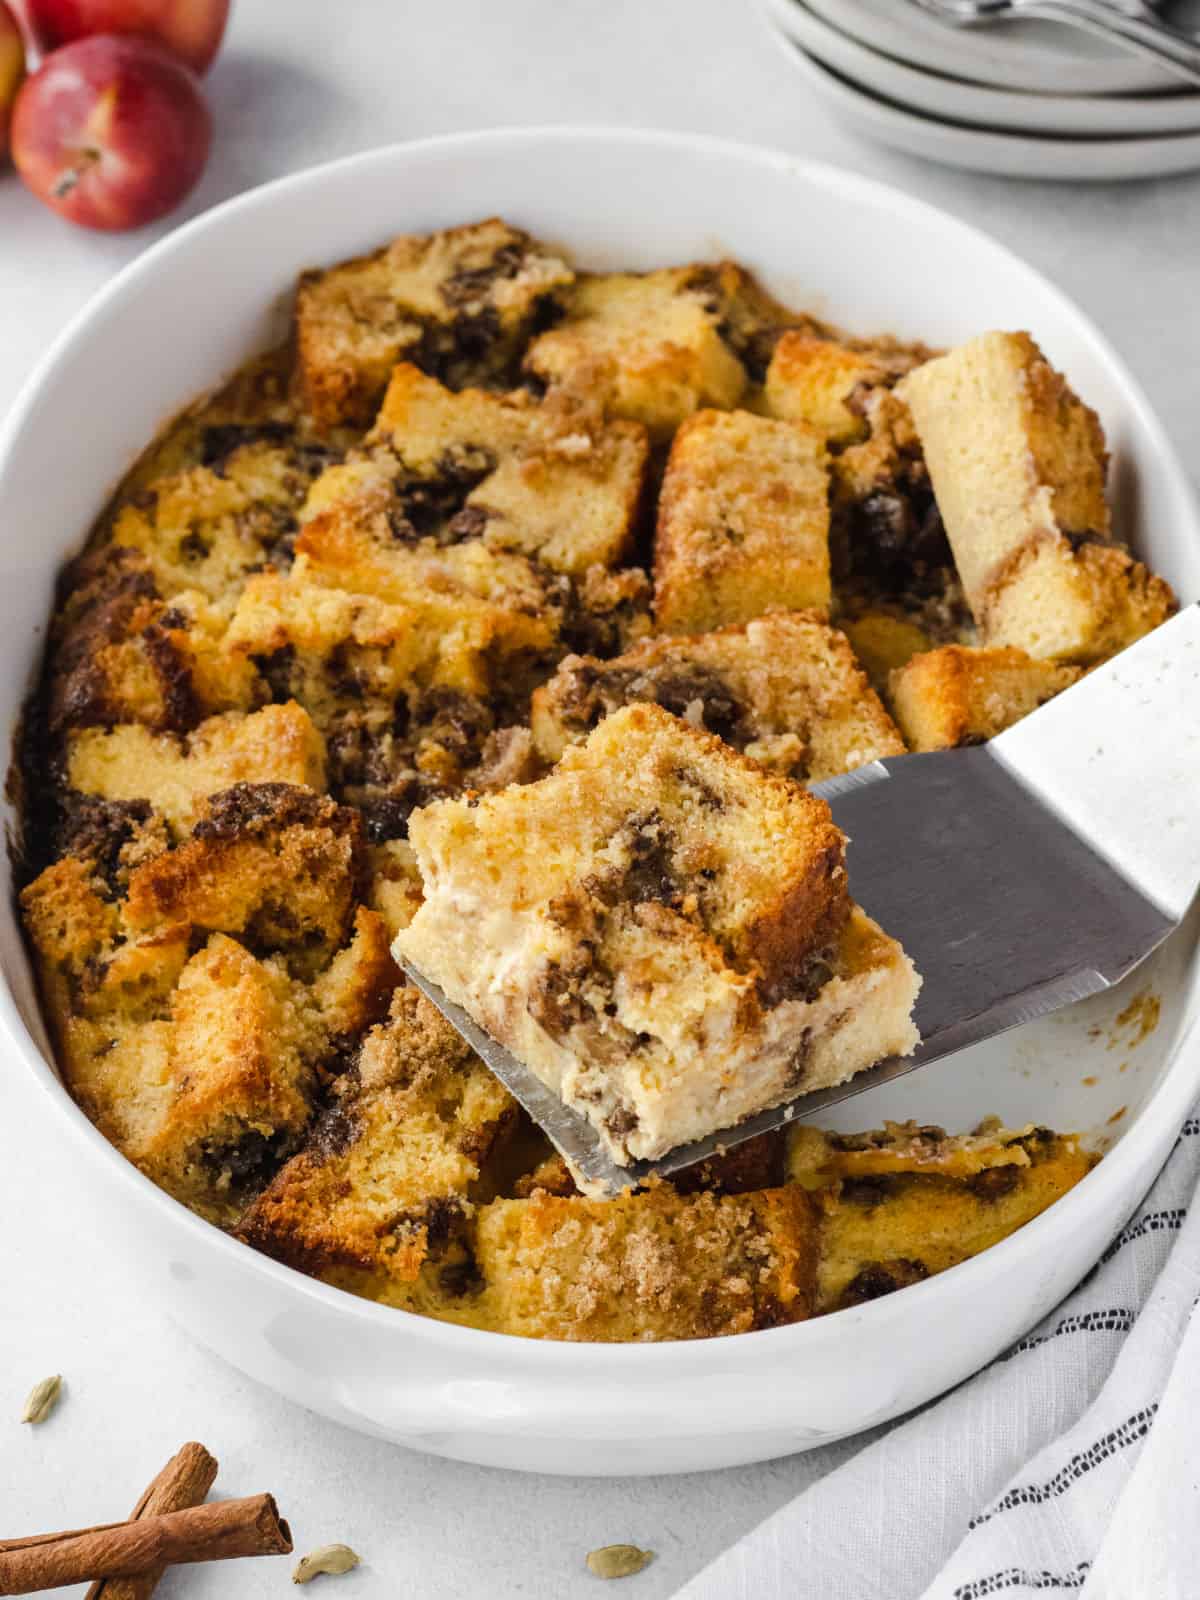 Apple bread pudding baked in an oval casserole with one slice removed on spatula.